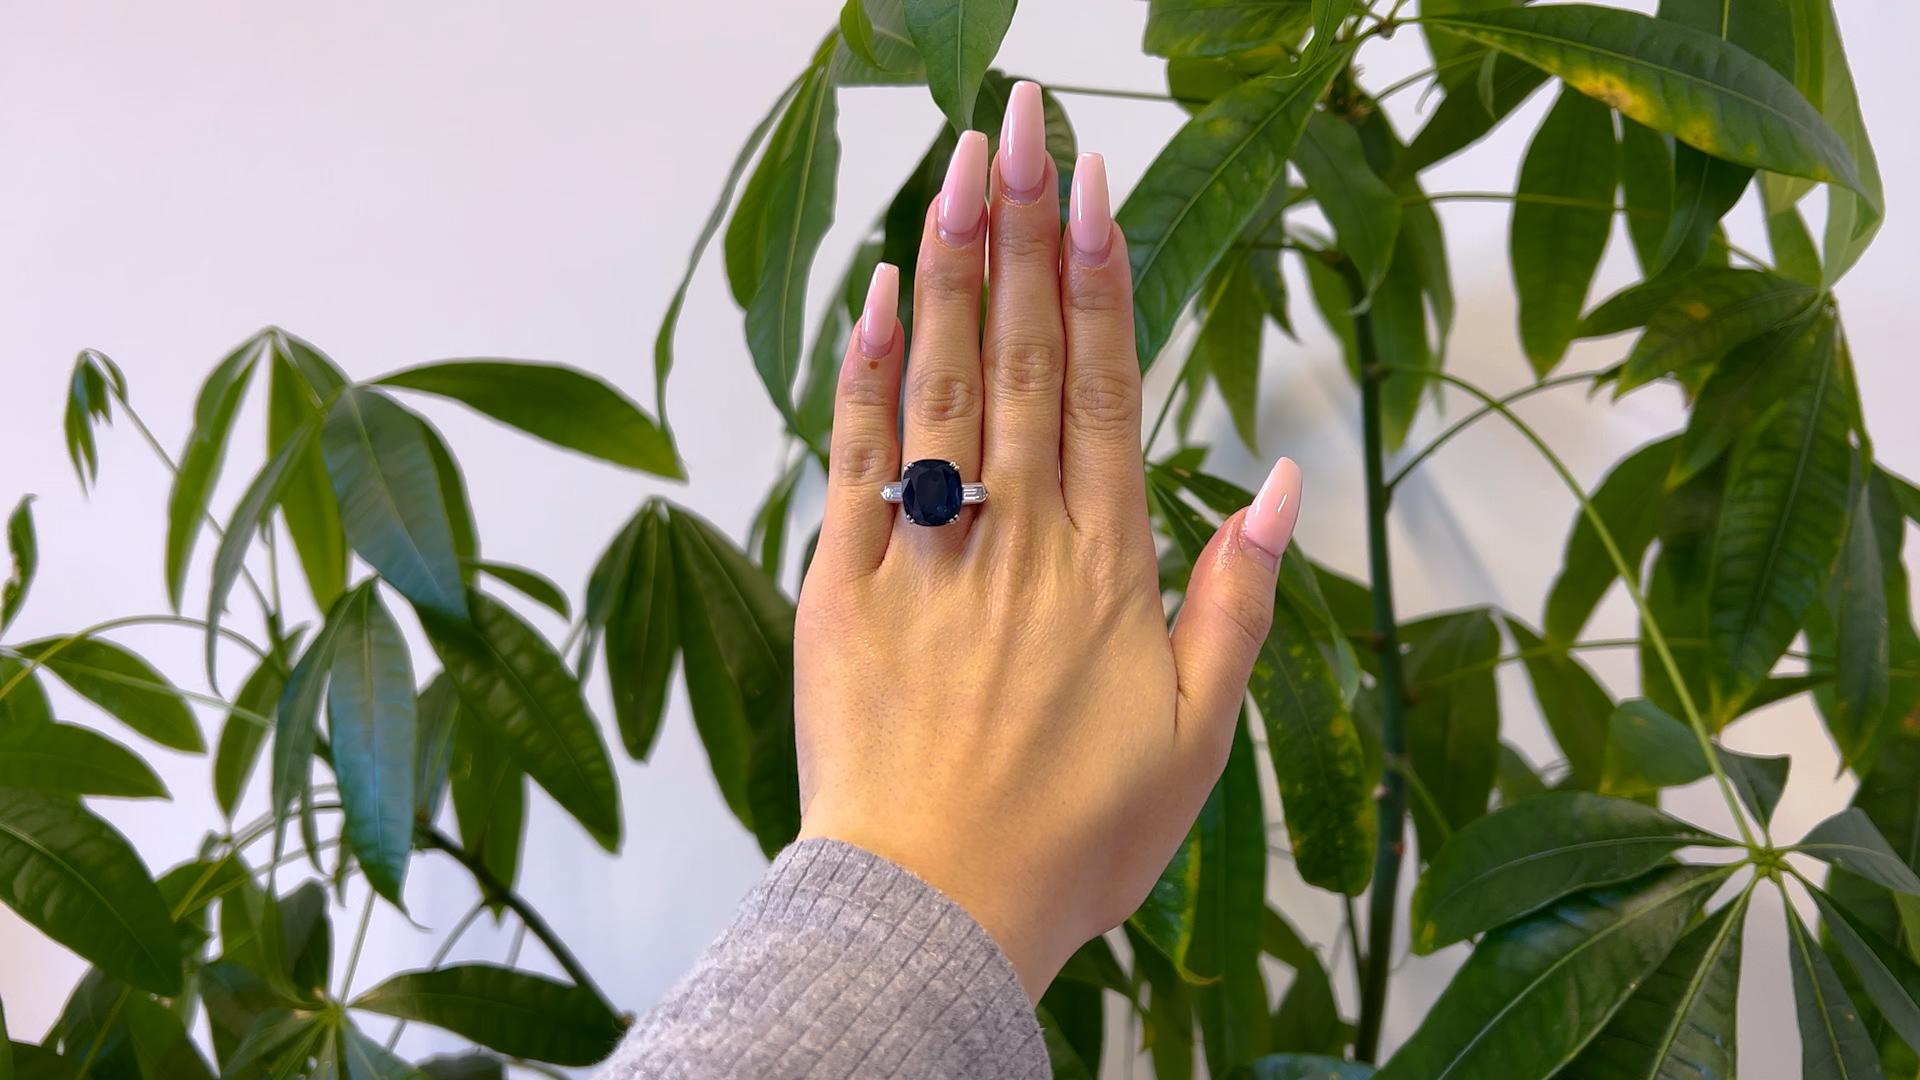 One Mid Century French GIA 8.33 Carat Sapphire and Diamond Platinum Ring. Featuring one GIA cushion mixed cut blue sapphire of 8.33 carats, accompanied with GIA #1236072969 stating the sapphire is of Thailand origin. Accented by two baguette cut